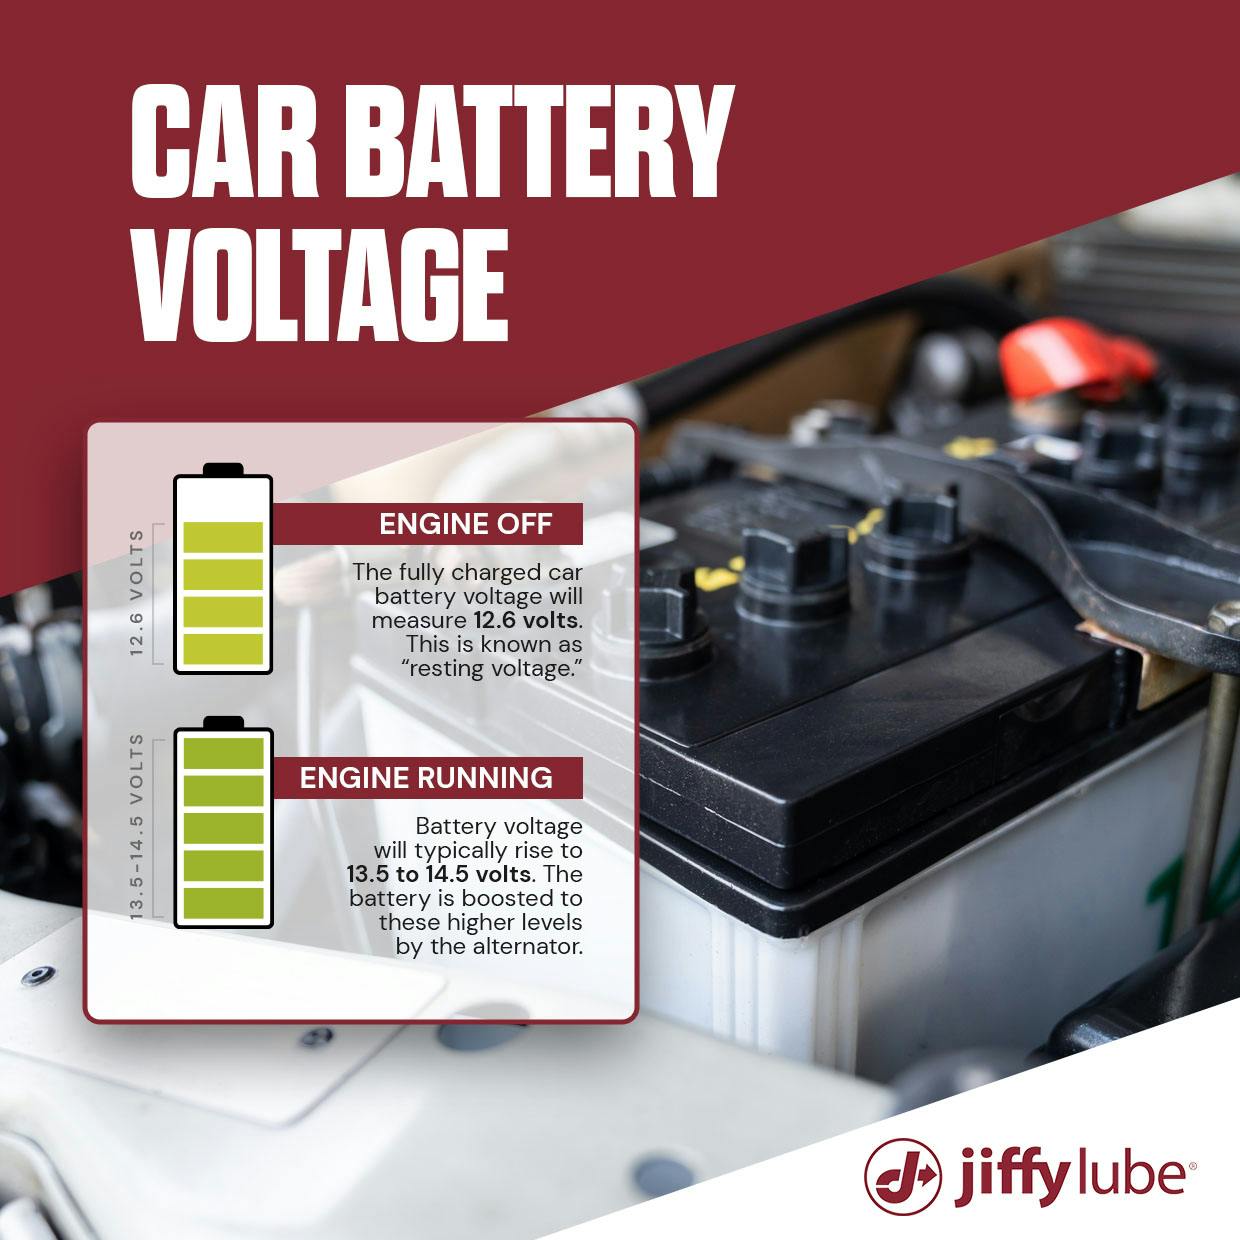 Car battery voltage graphic